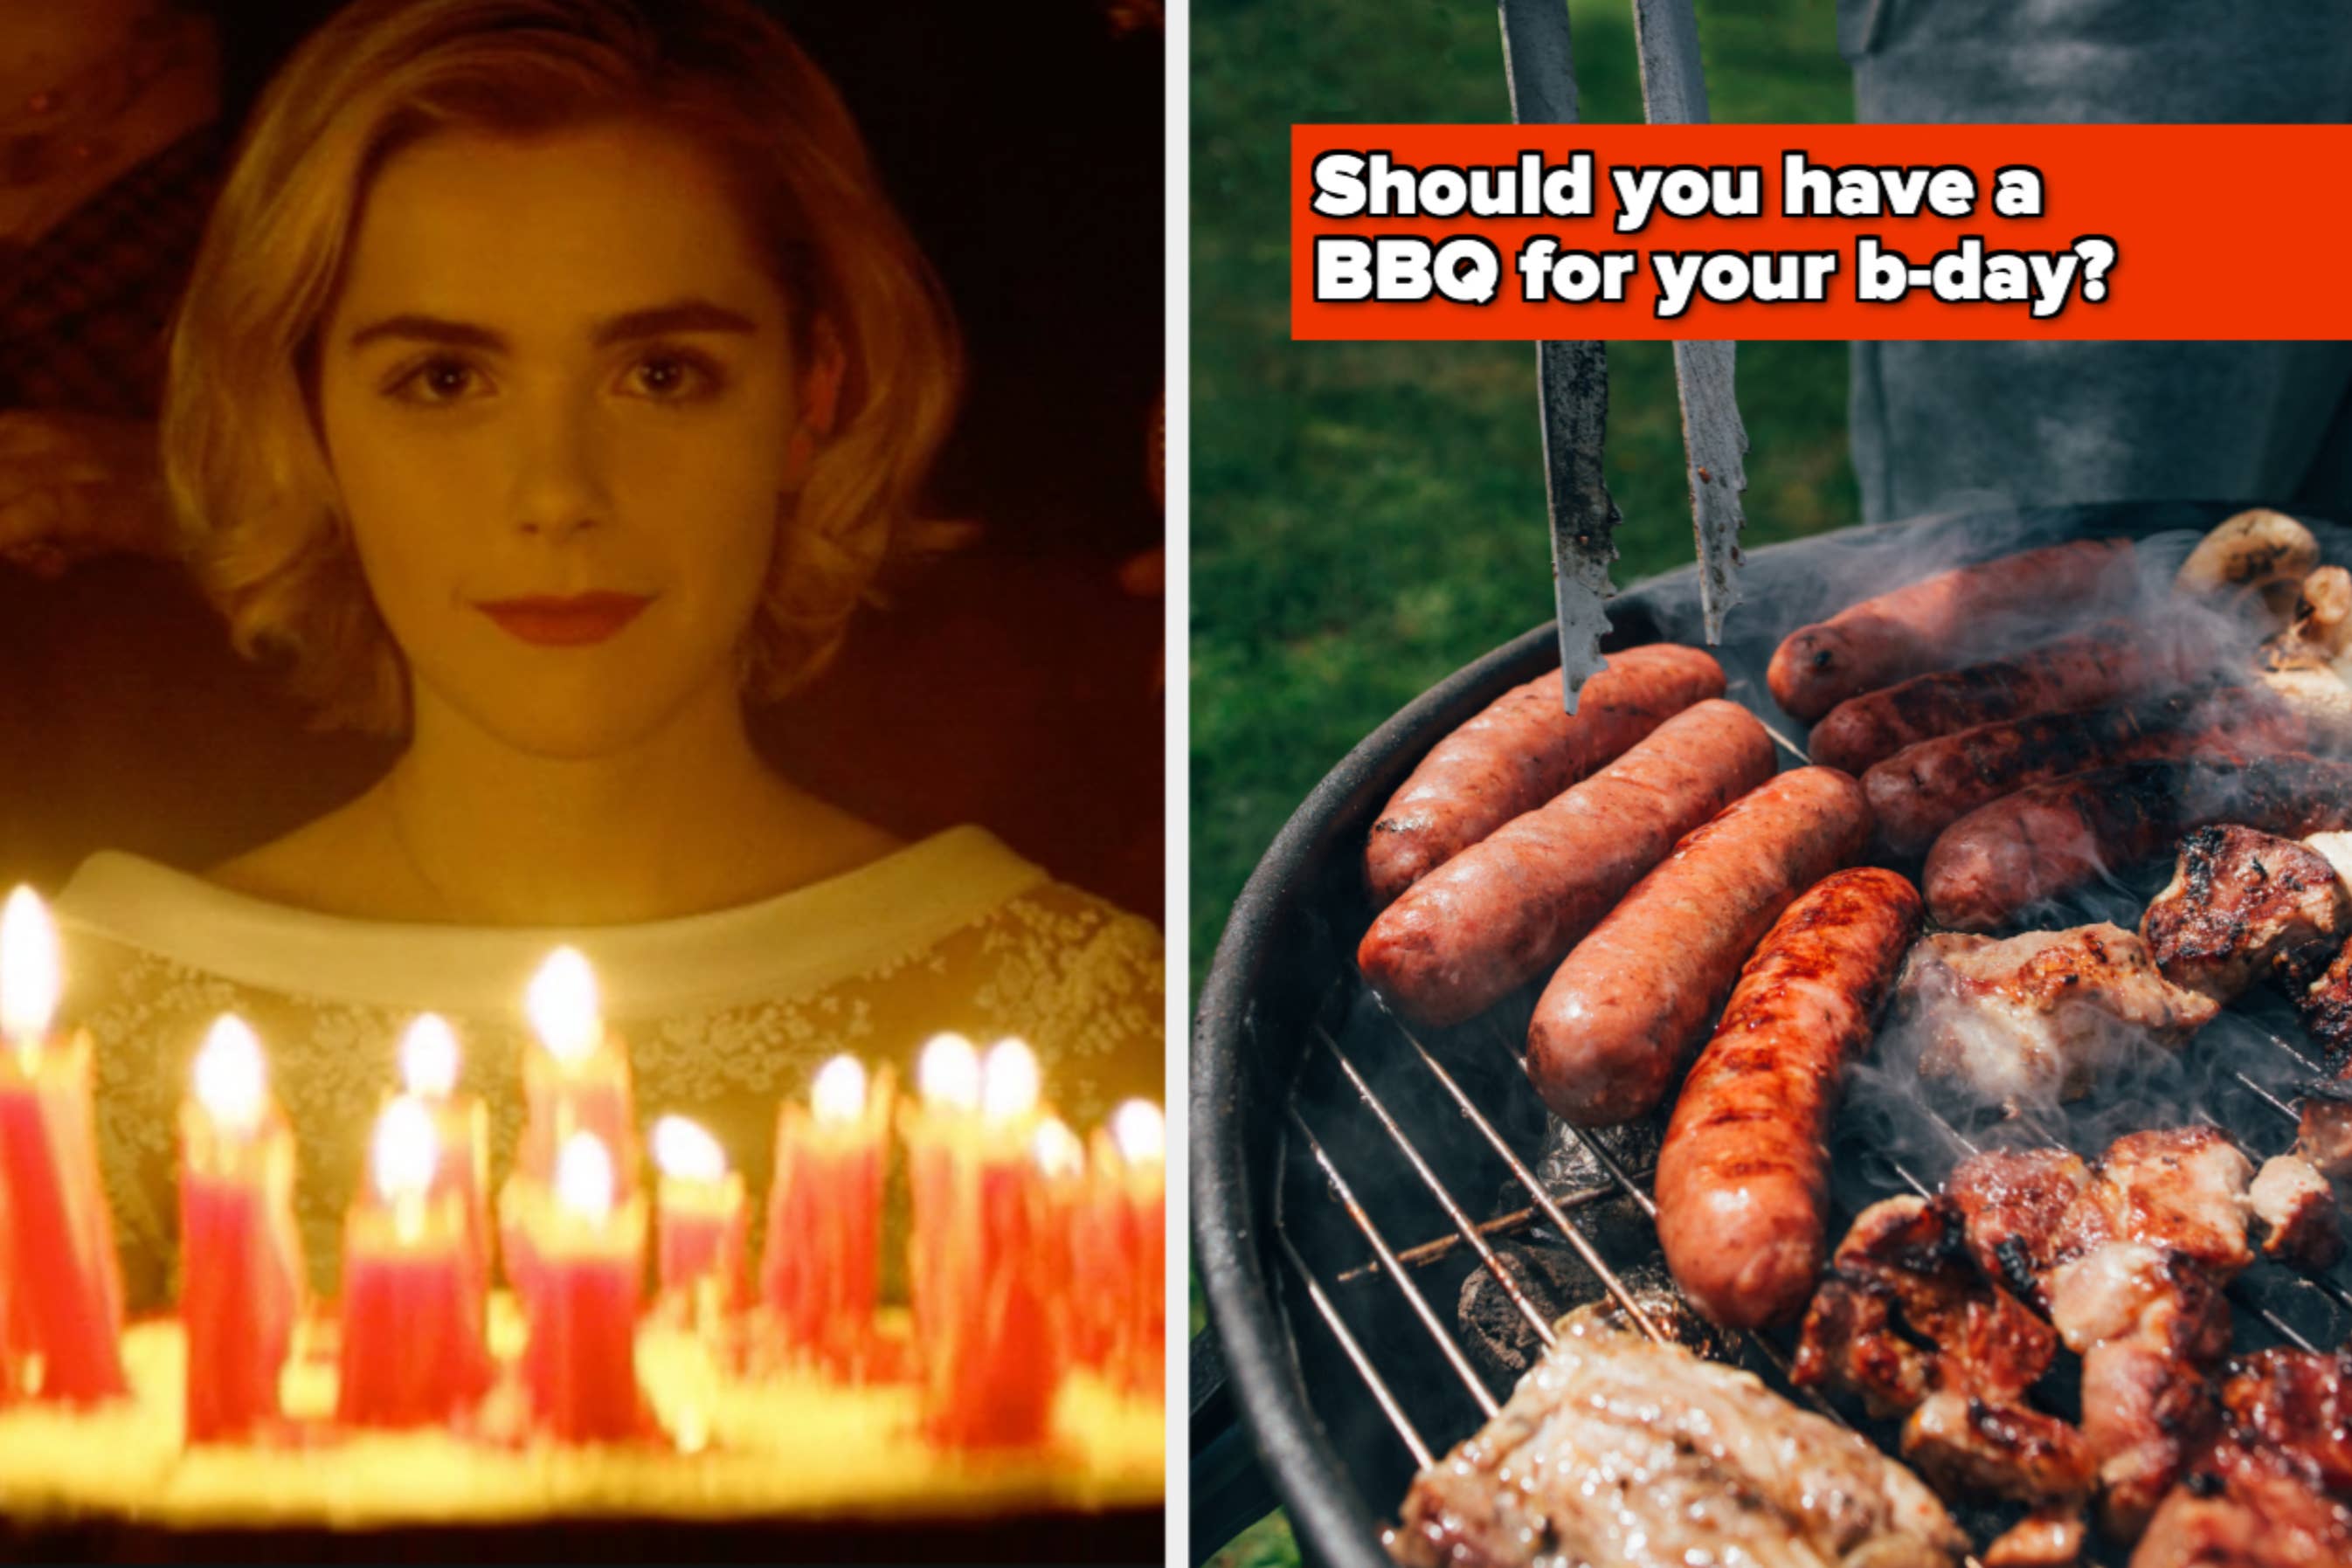 Left: A person with birthday candles in front. Right: A BBQ grill with various meats cooking. Text: "Should you have a BBQ for your b-day?"